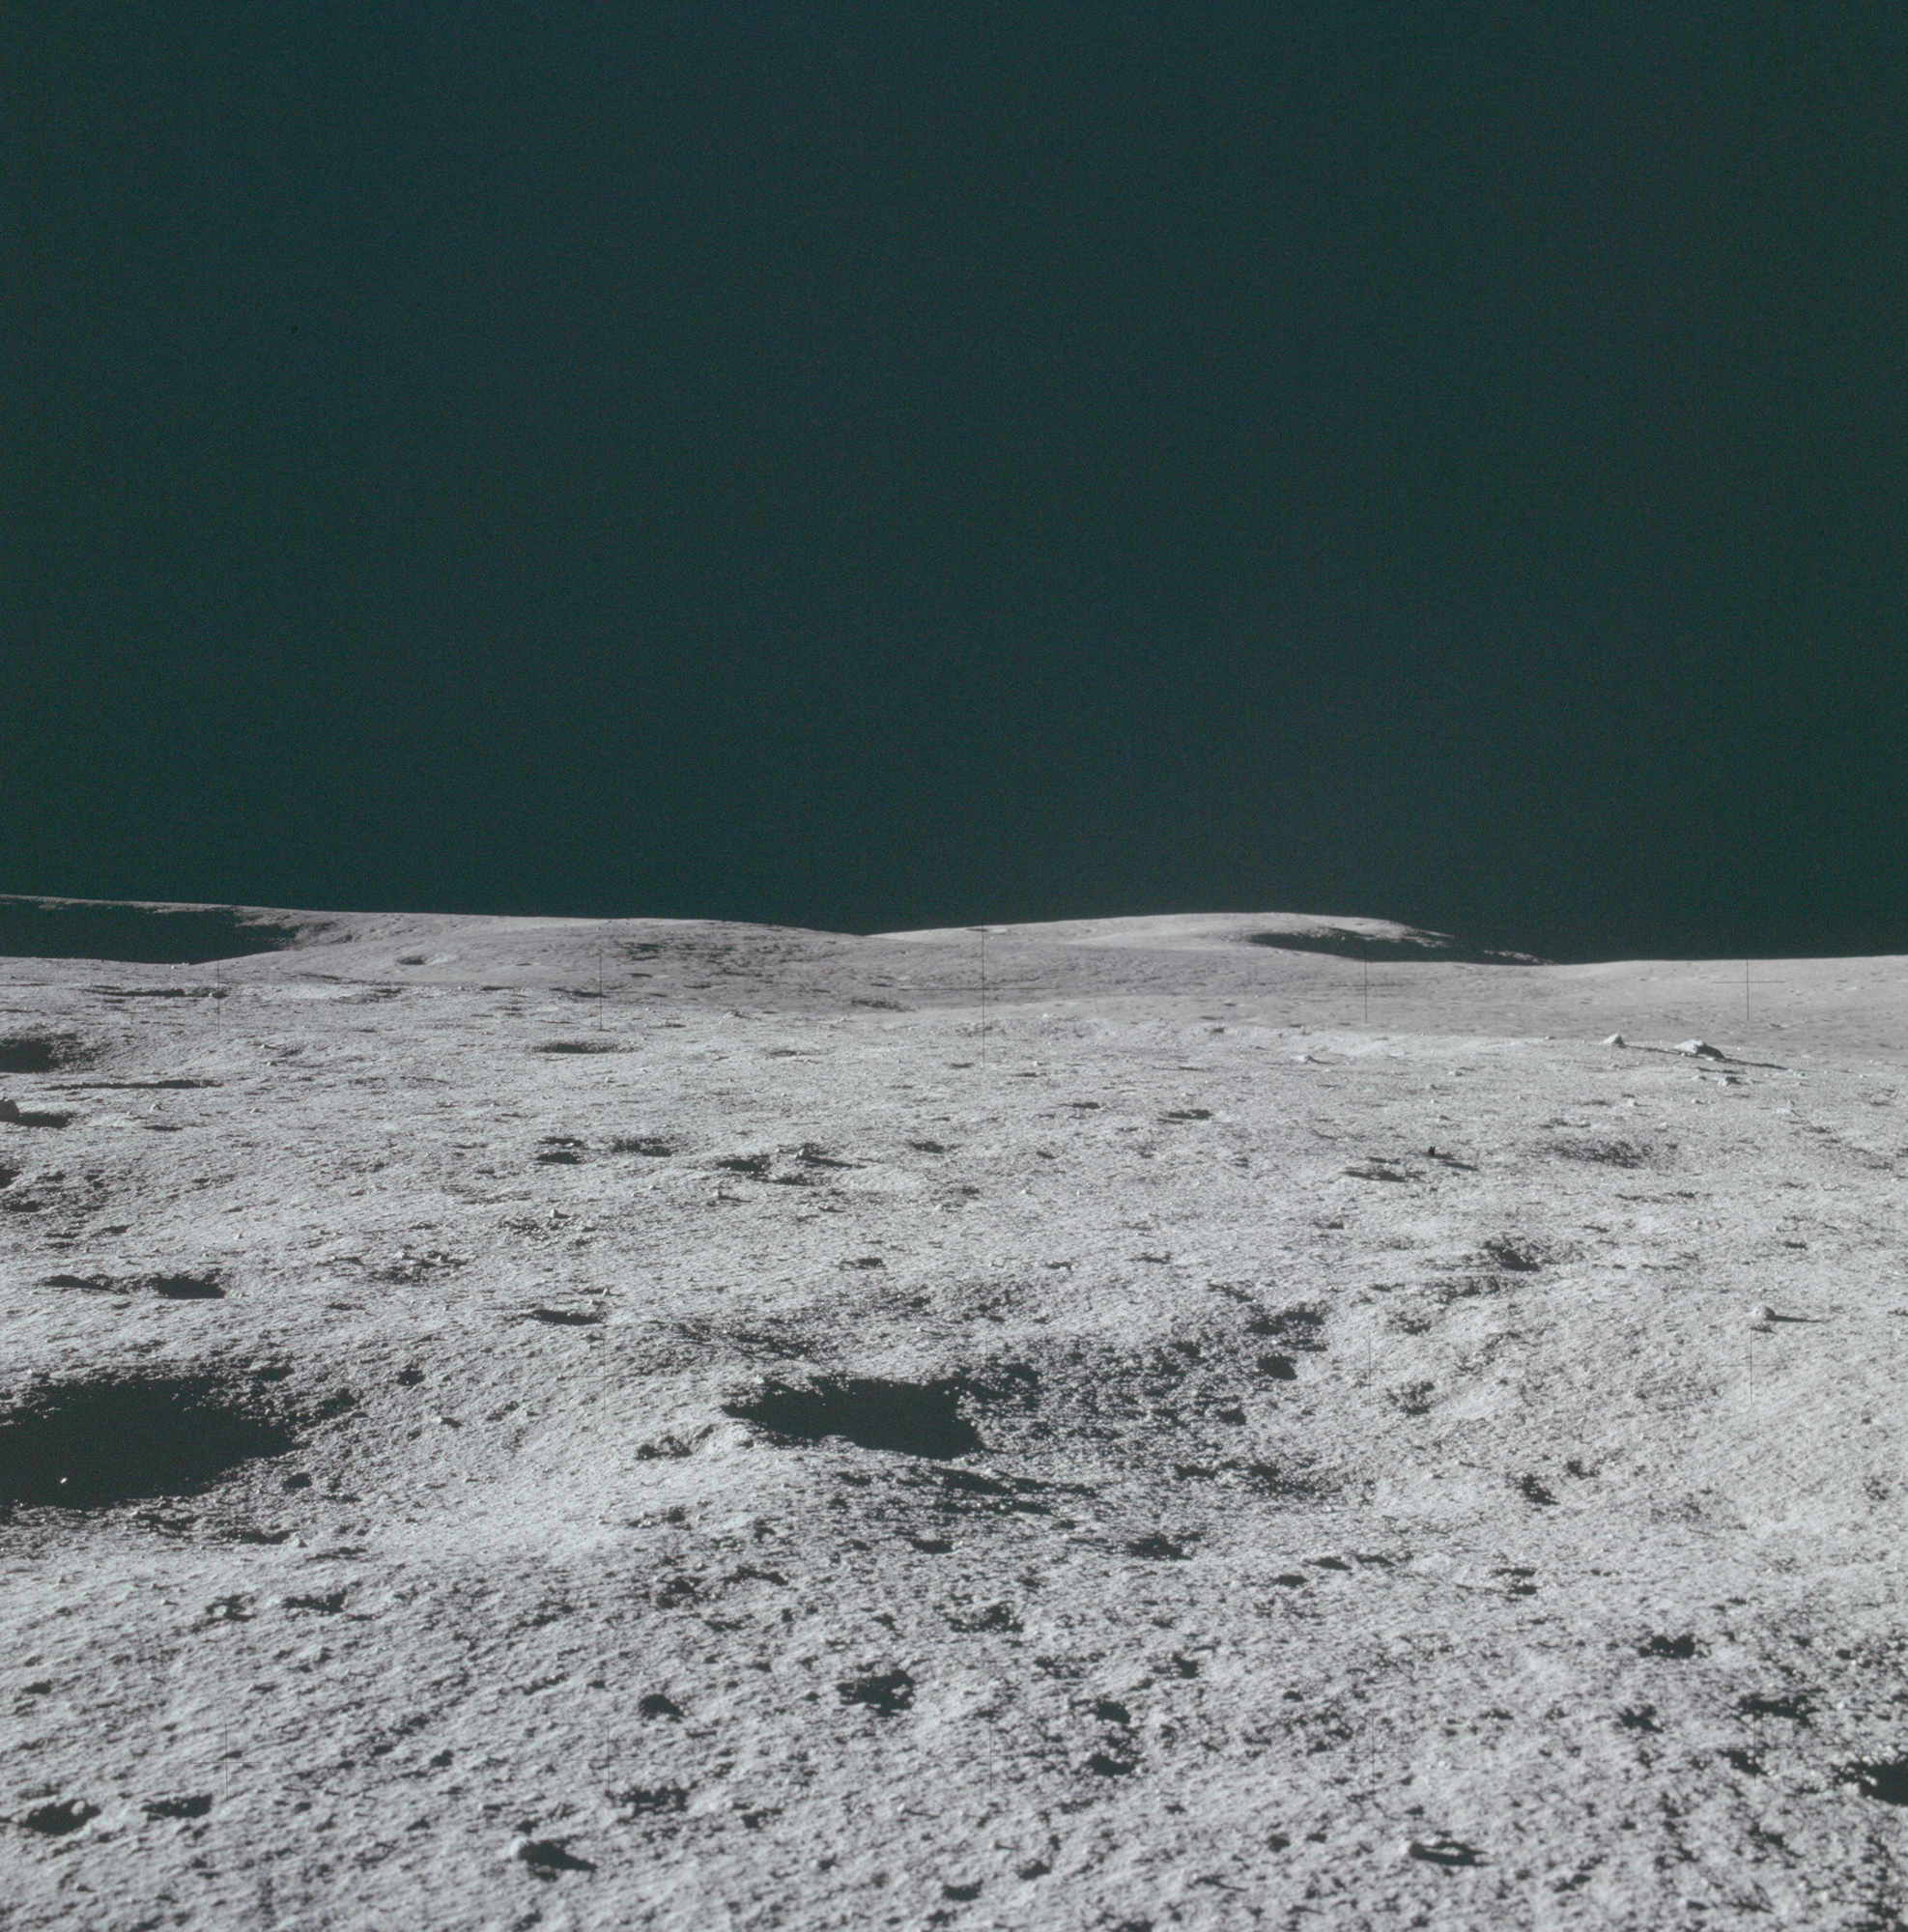 apollo-14-shows-a-portion-of-the-ridge-that-forms-the-local-horizon-on-moon.jpg